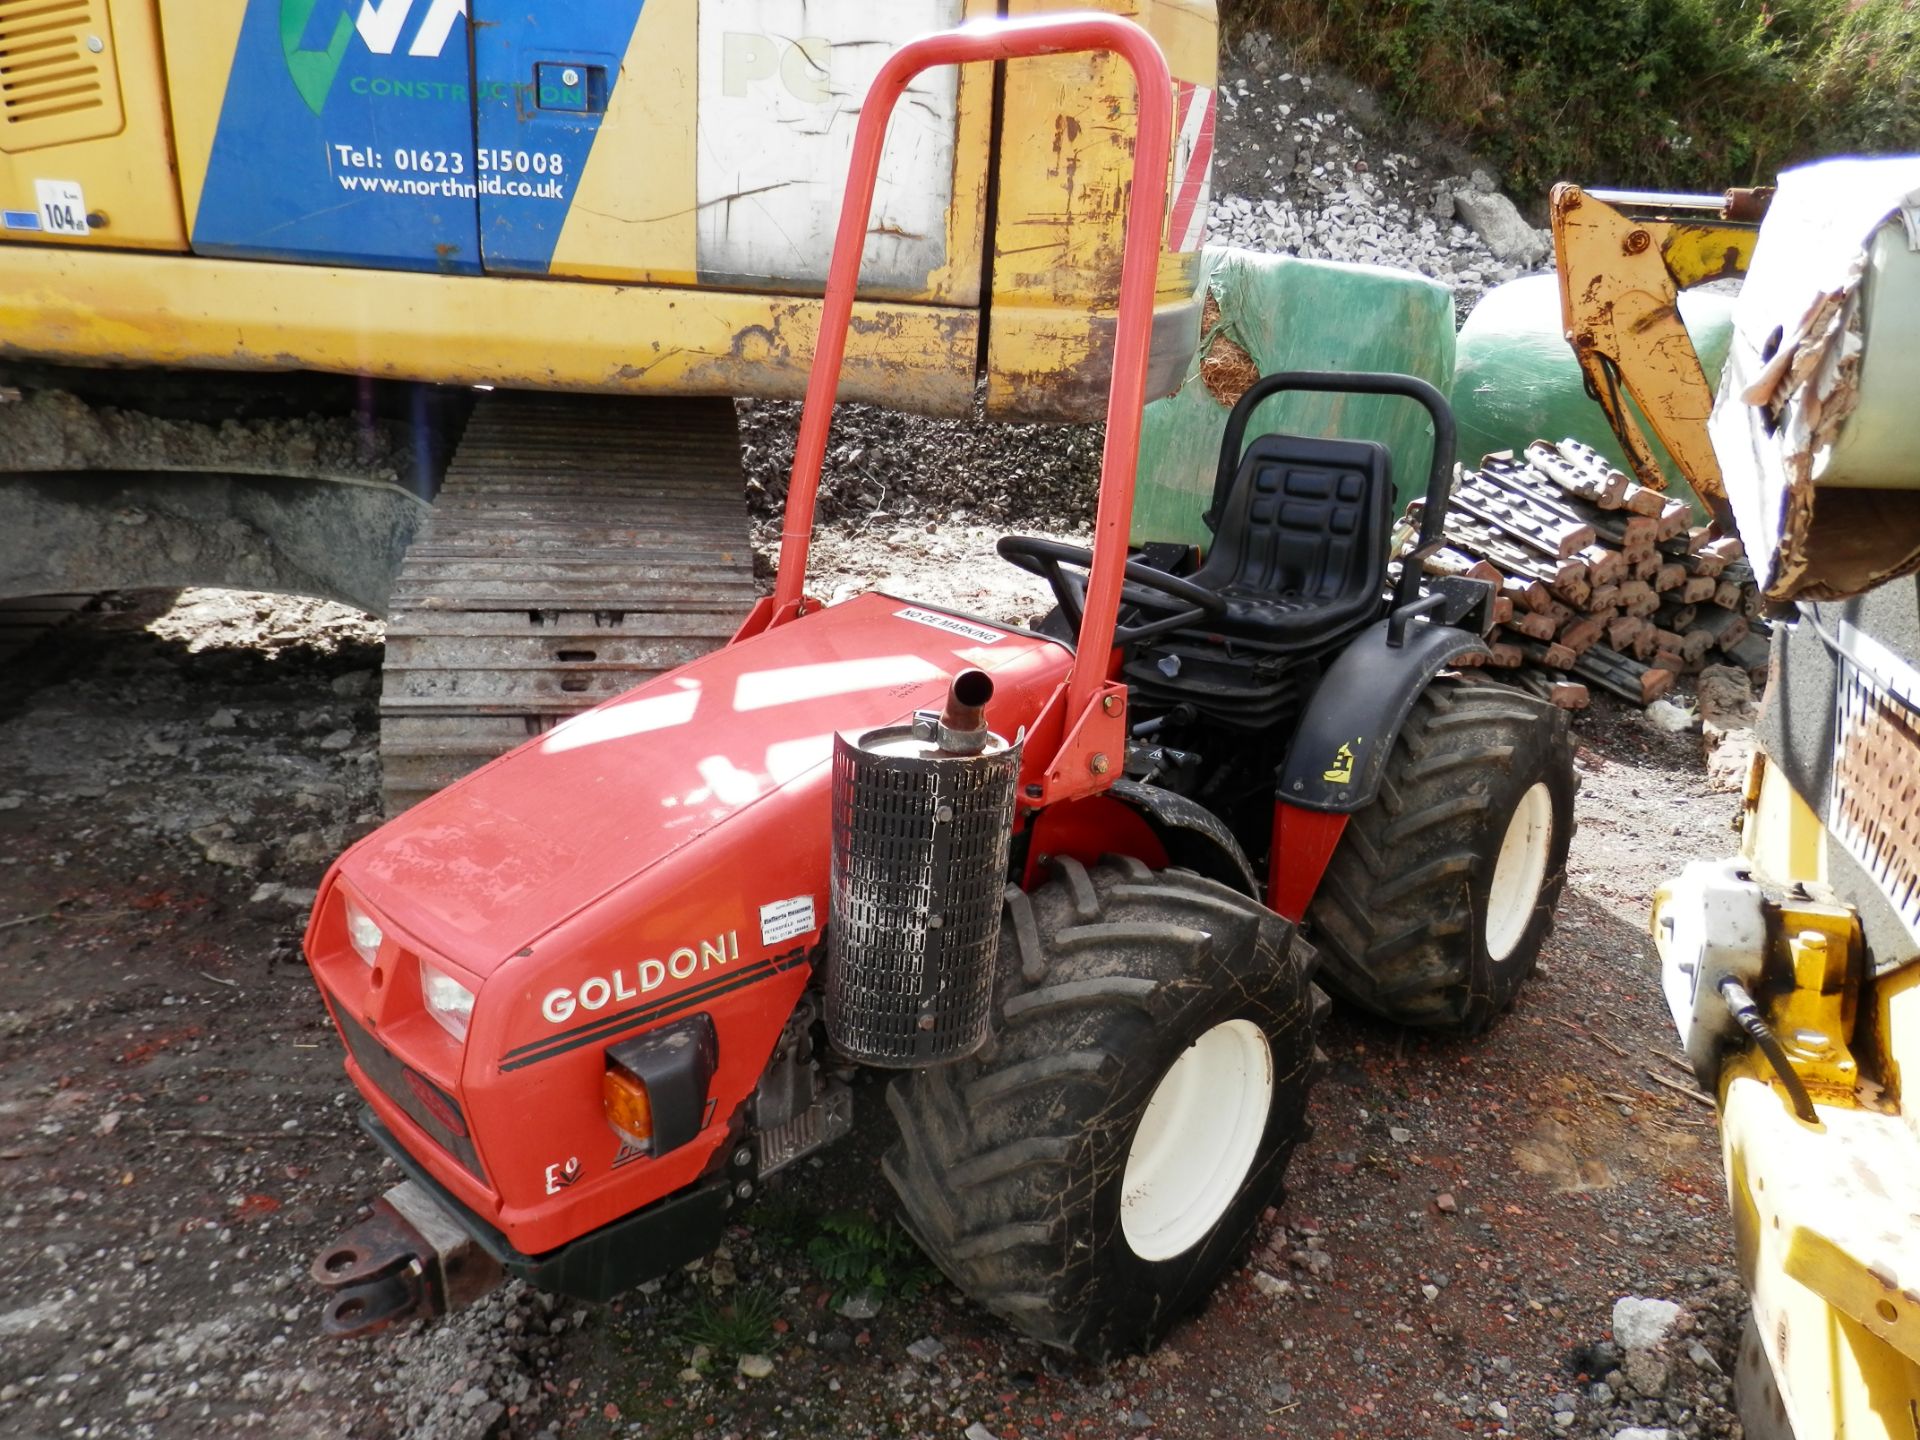 GOLDINI 1500 KG 21A, COMPACT DIESEL TRACTOR. READY FOR WORK.